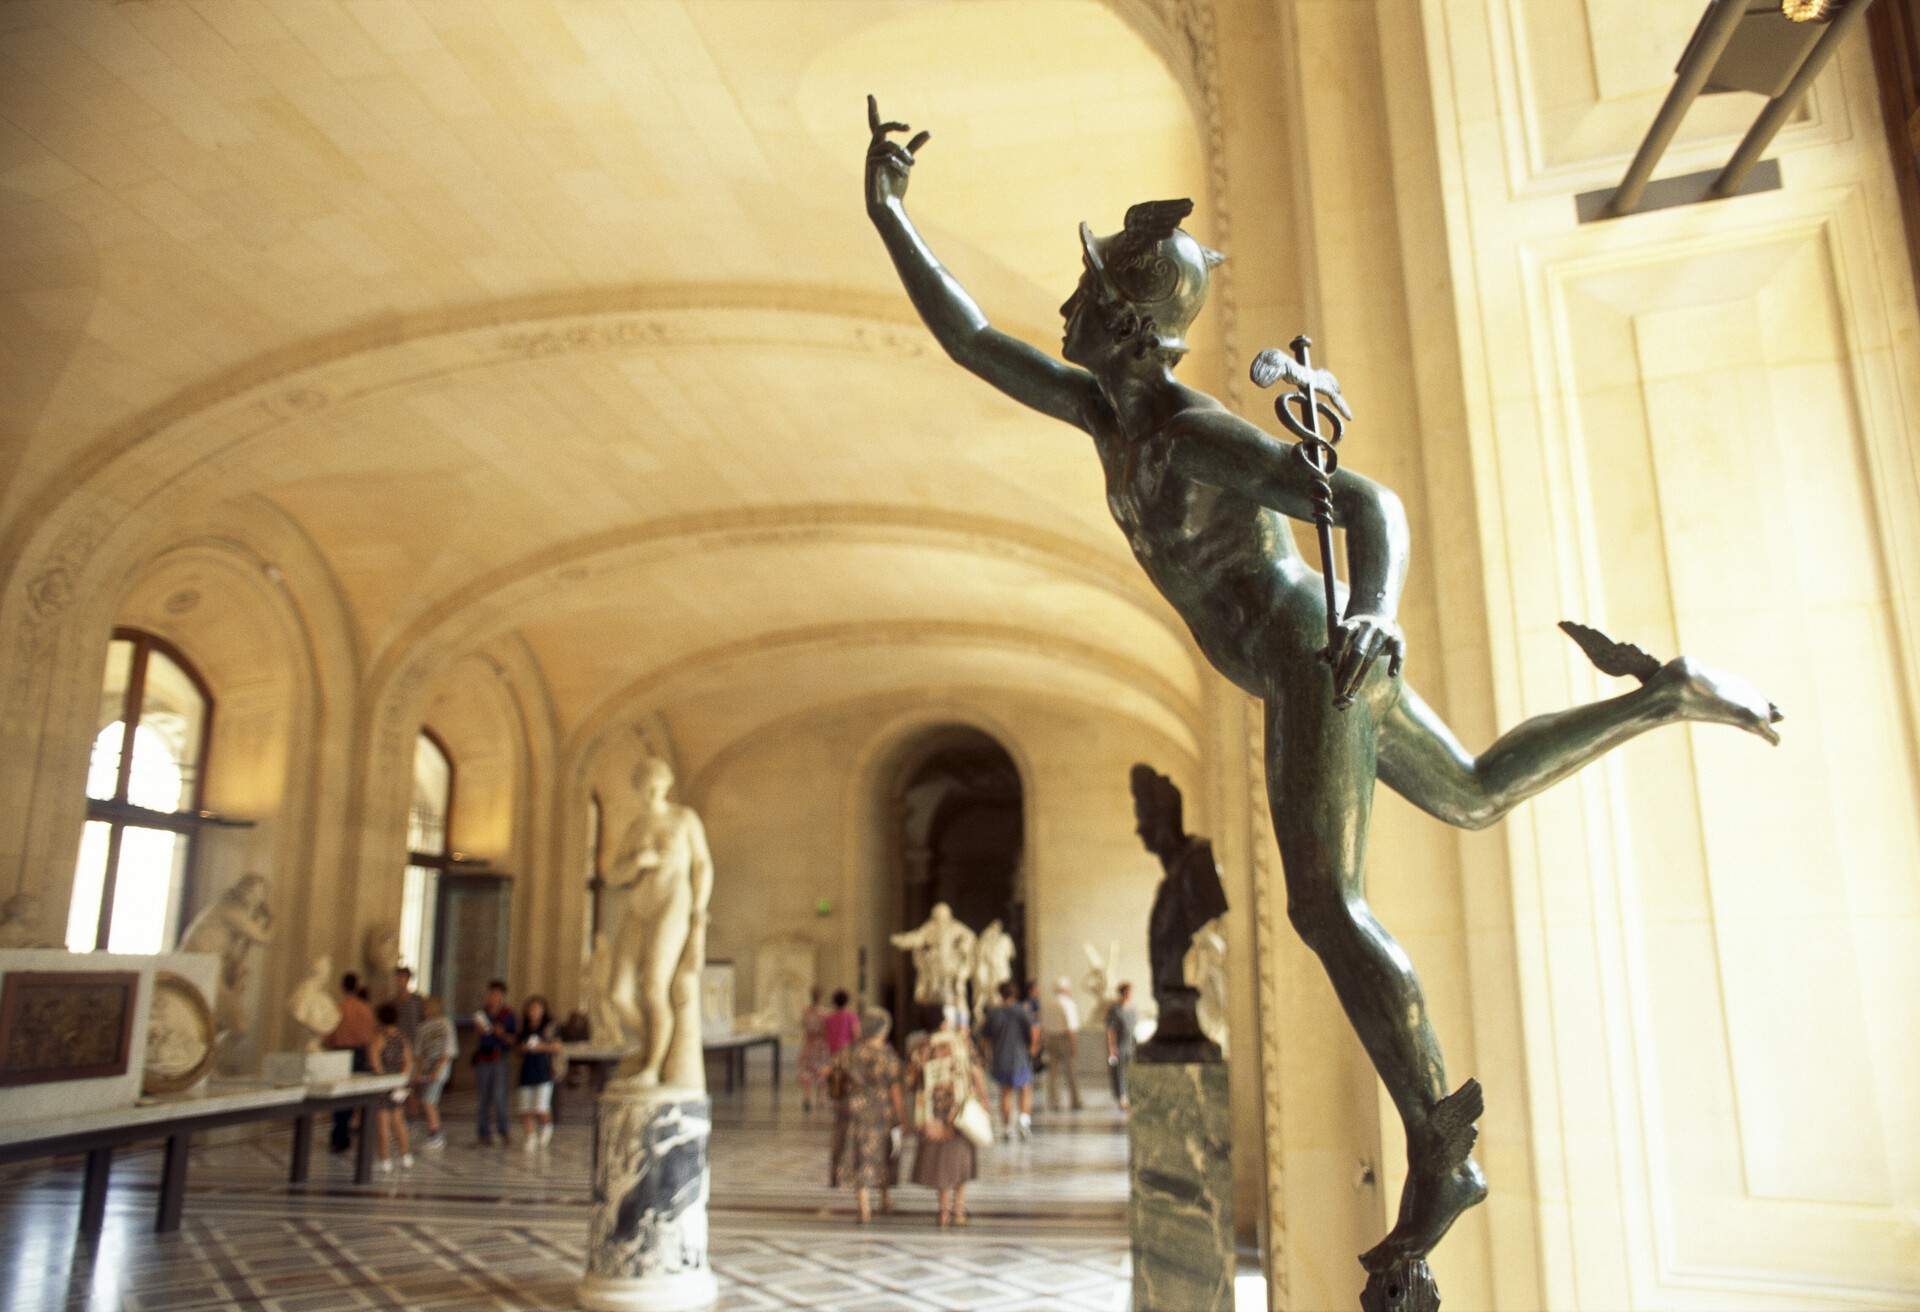 dest_france_paris_louvre-museum_mercury_gettyimages-76721967_universal_within-usage-period_61947.jpg